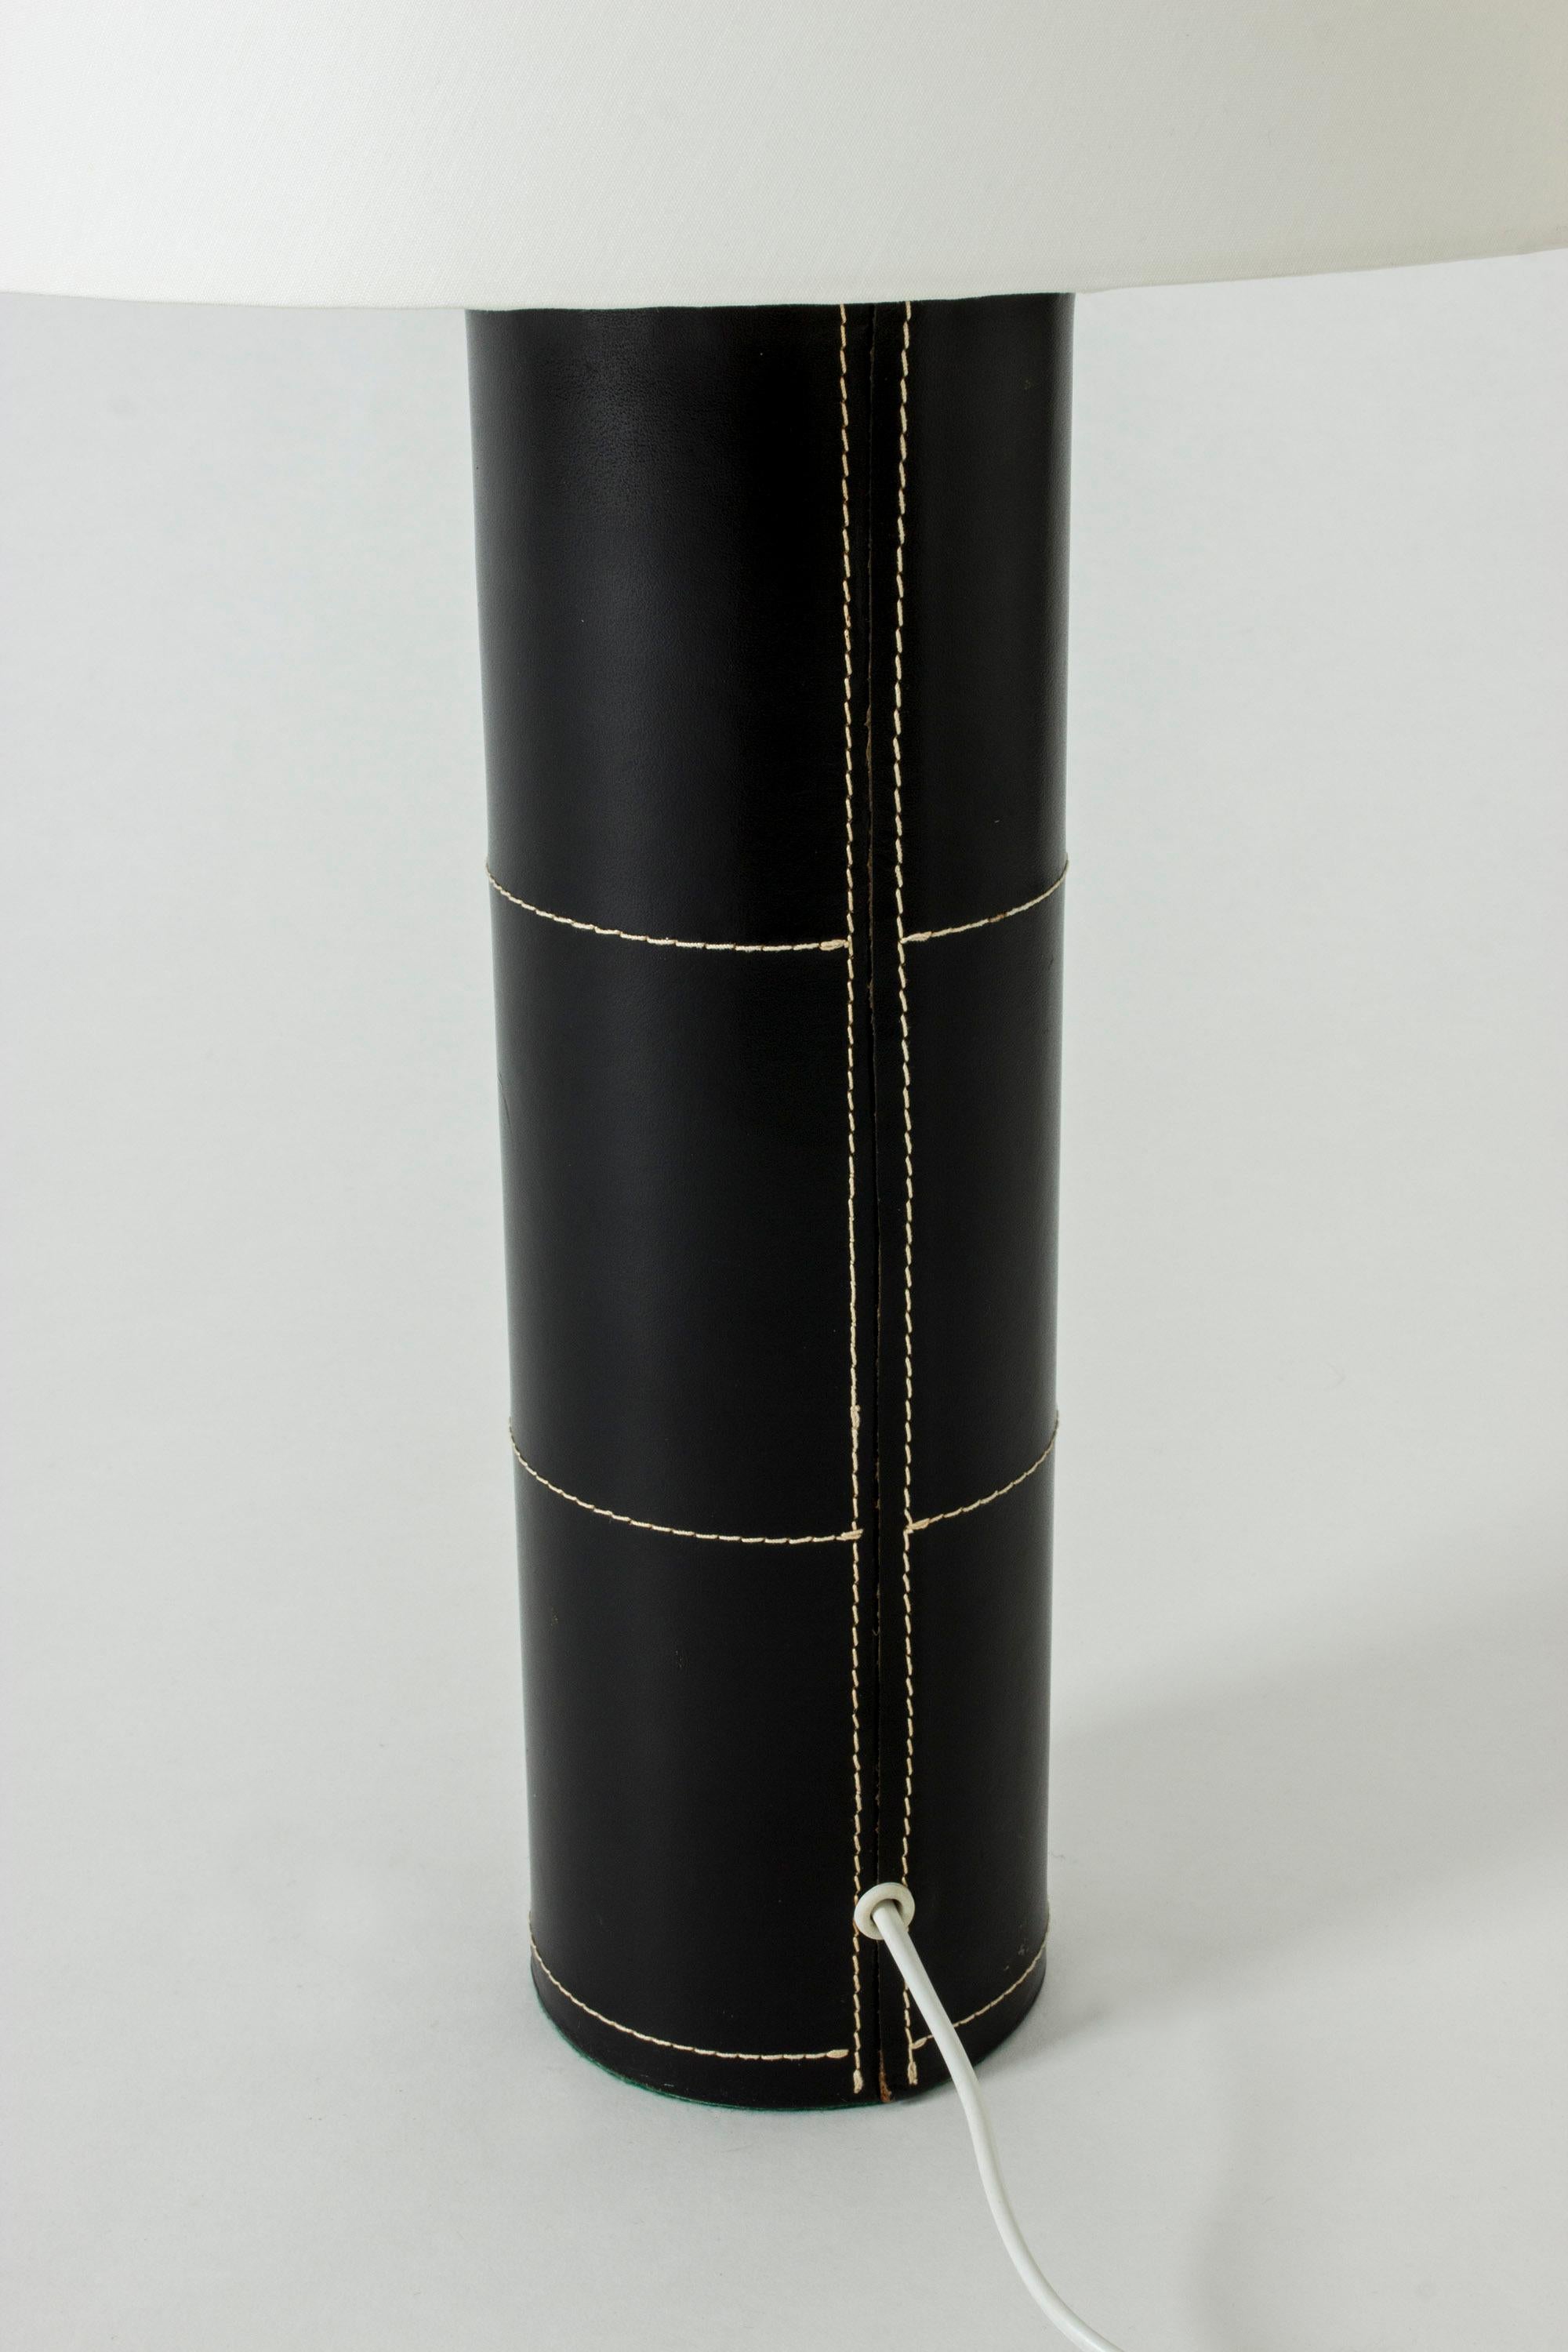 Midcentury Black Leather Table Lamp from Bergboms In Good Condition For Sale In Stockholm, SE